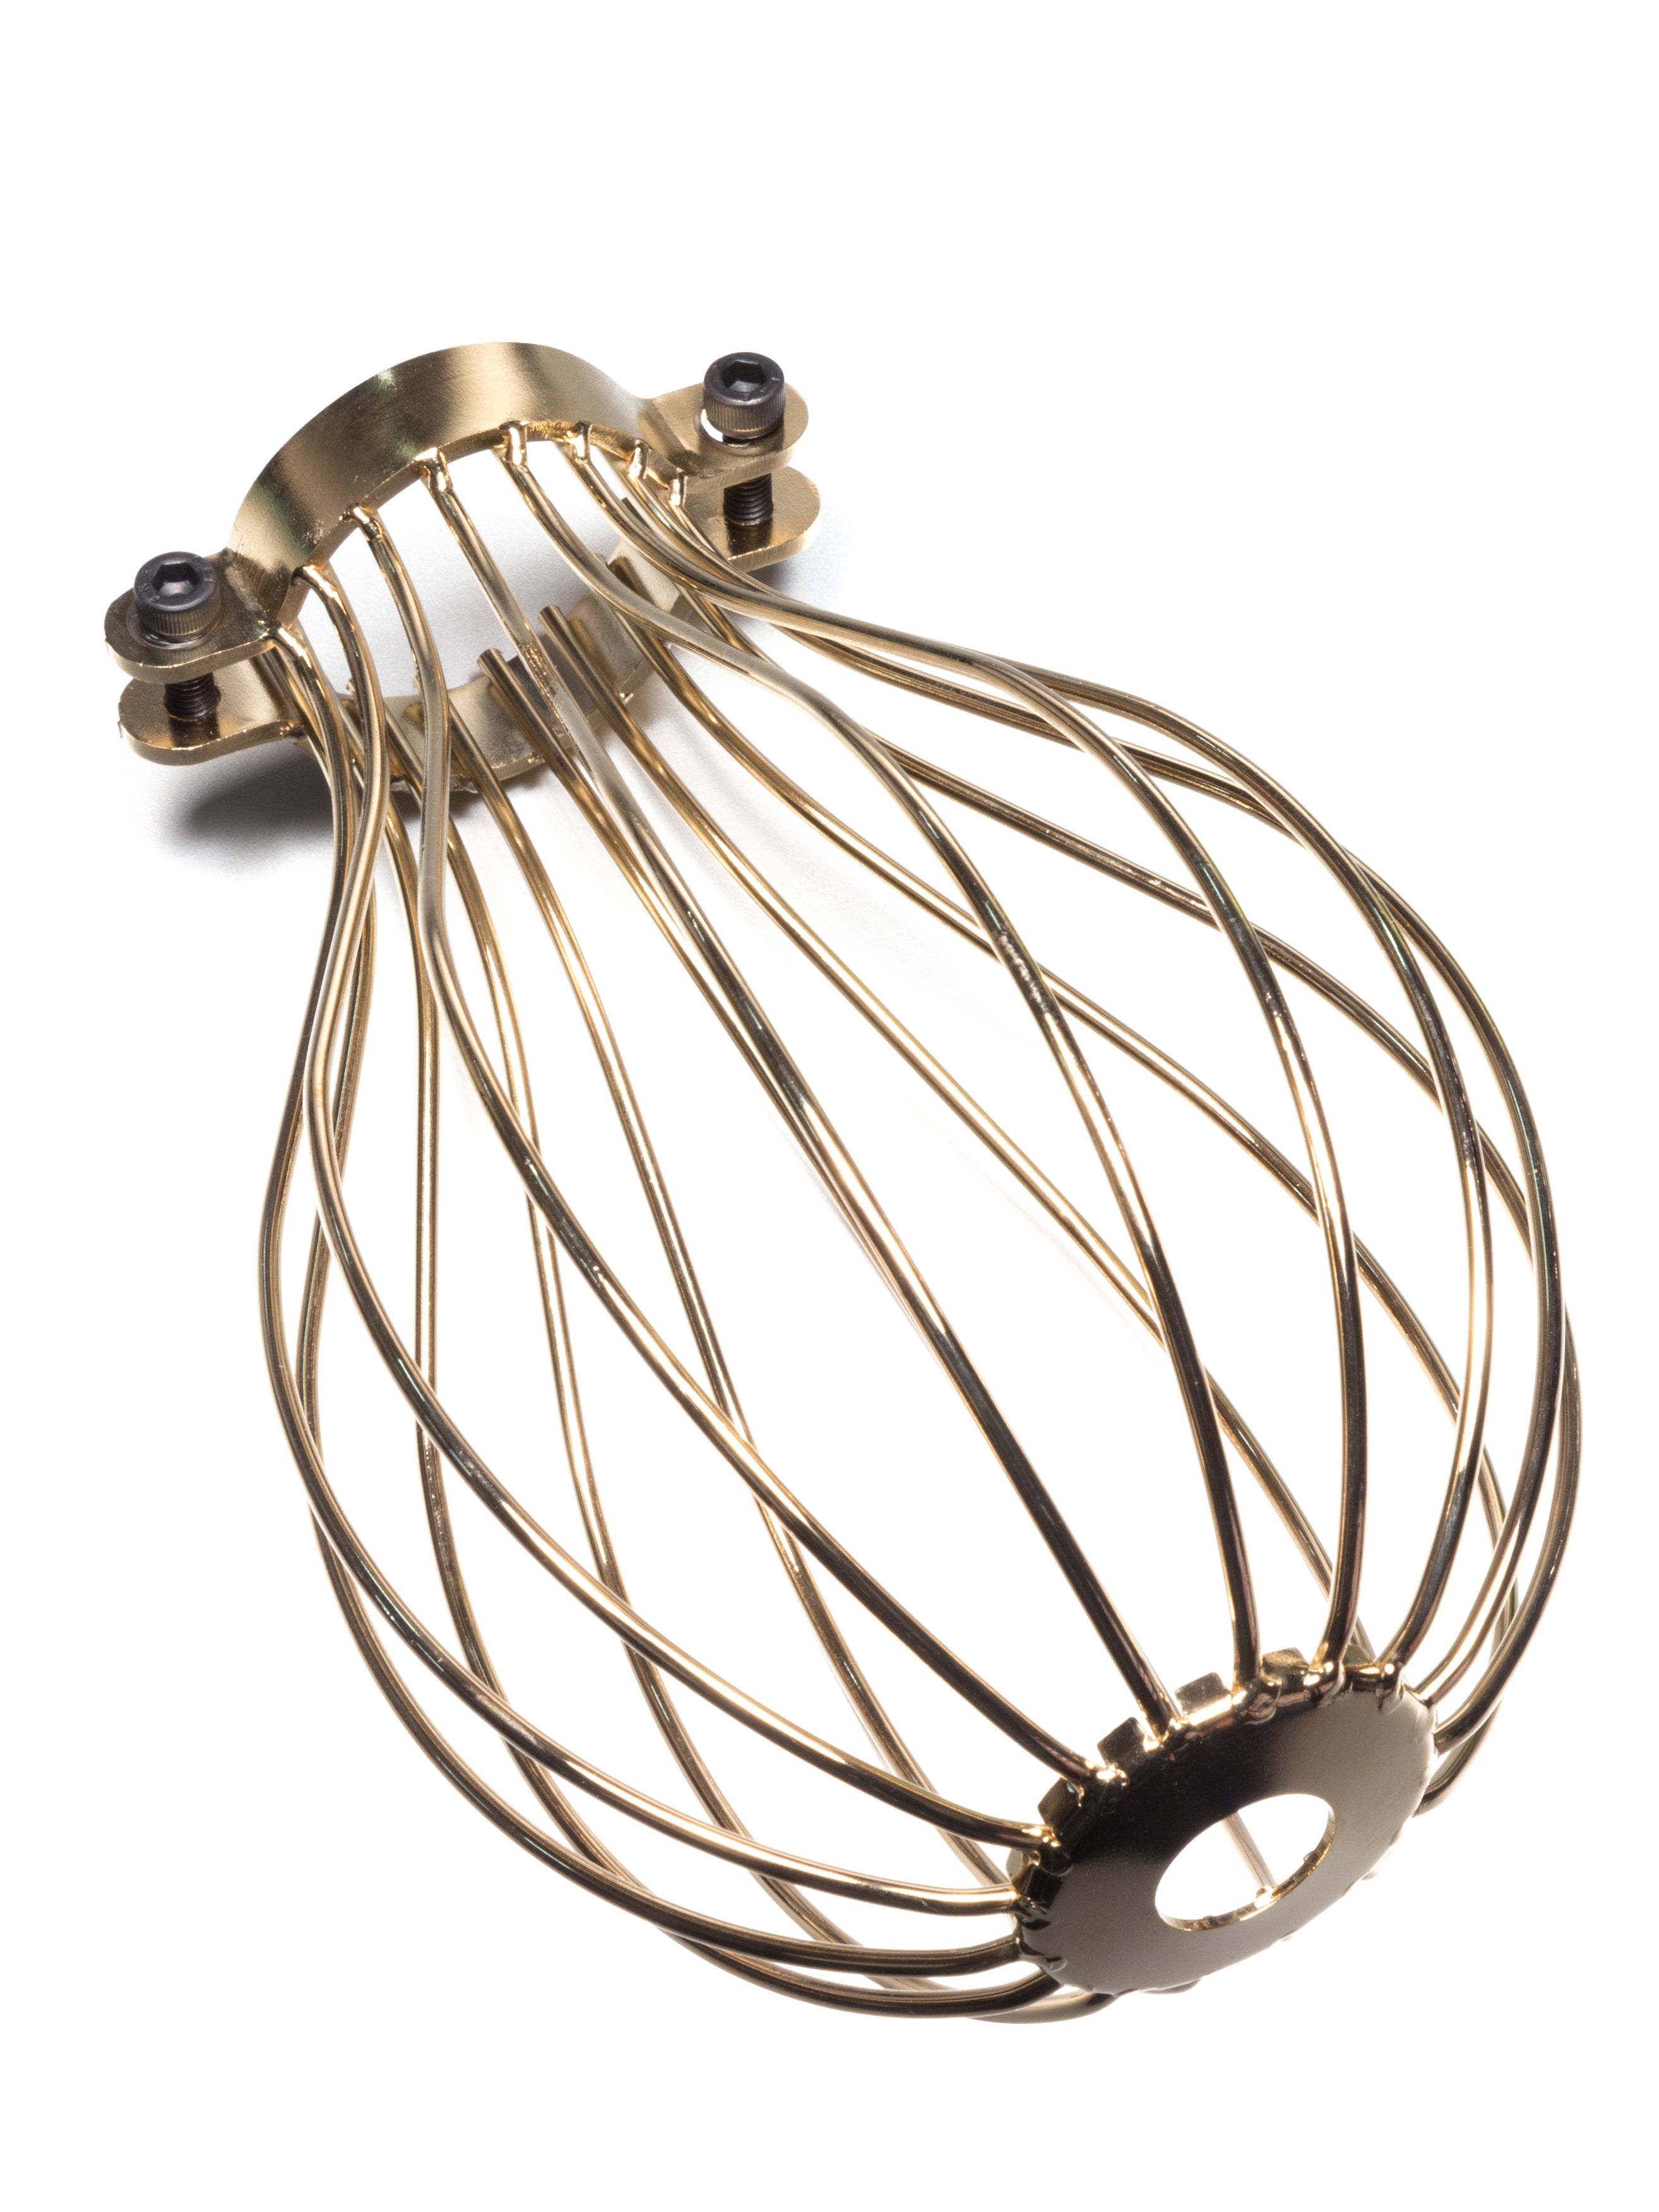 Gold Balloon Cage Pendant | End-Of-Line